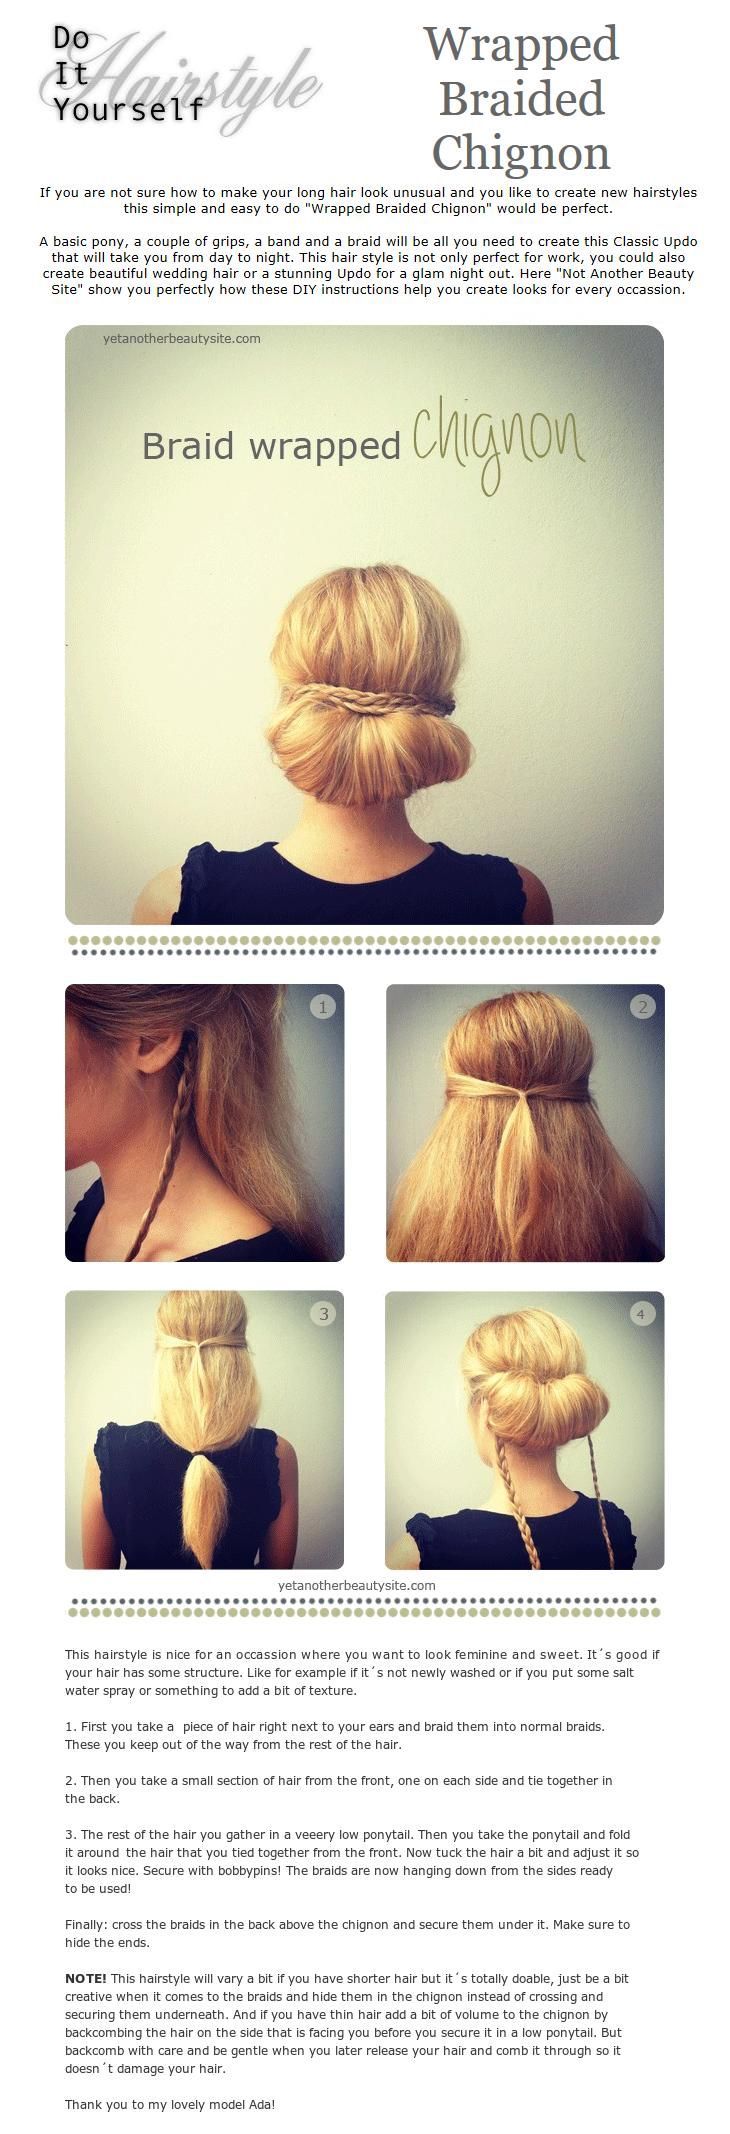 Um wow. Definitely want to try this now that my hair is a tad bit longer